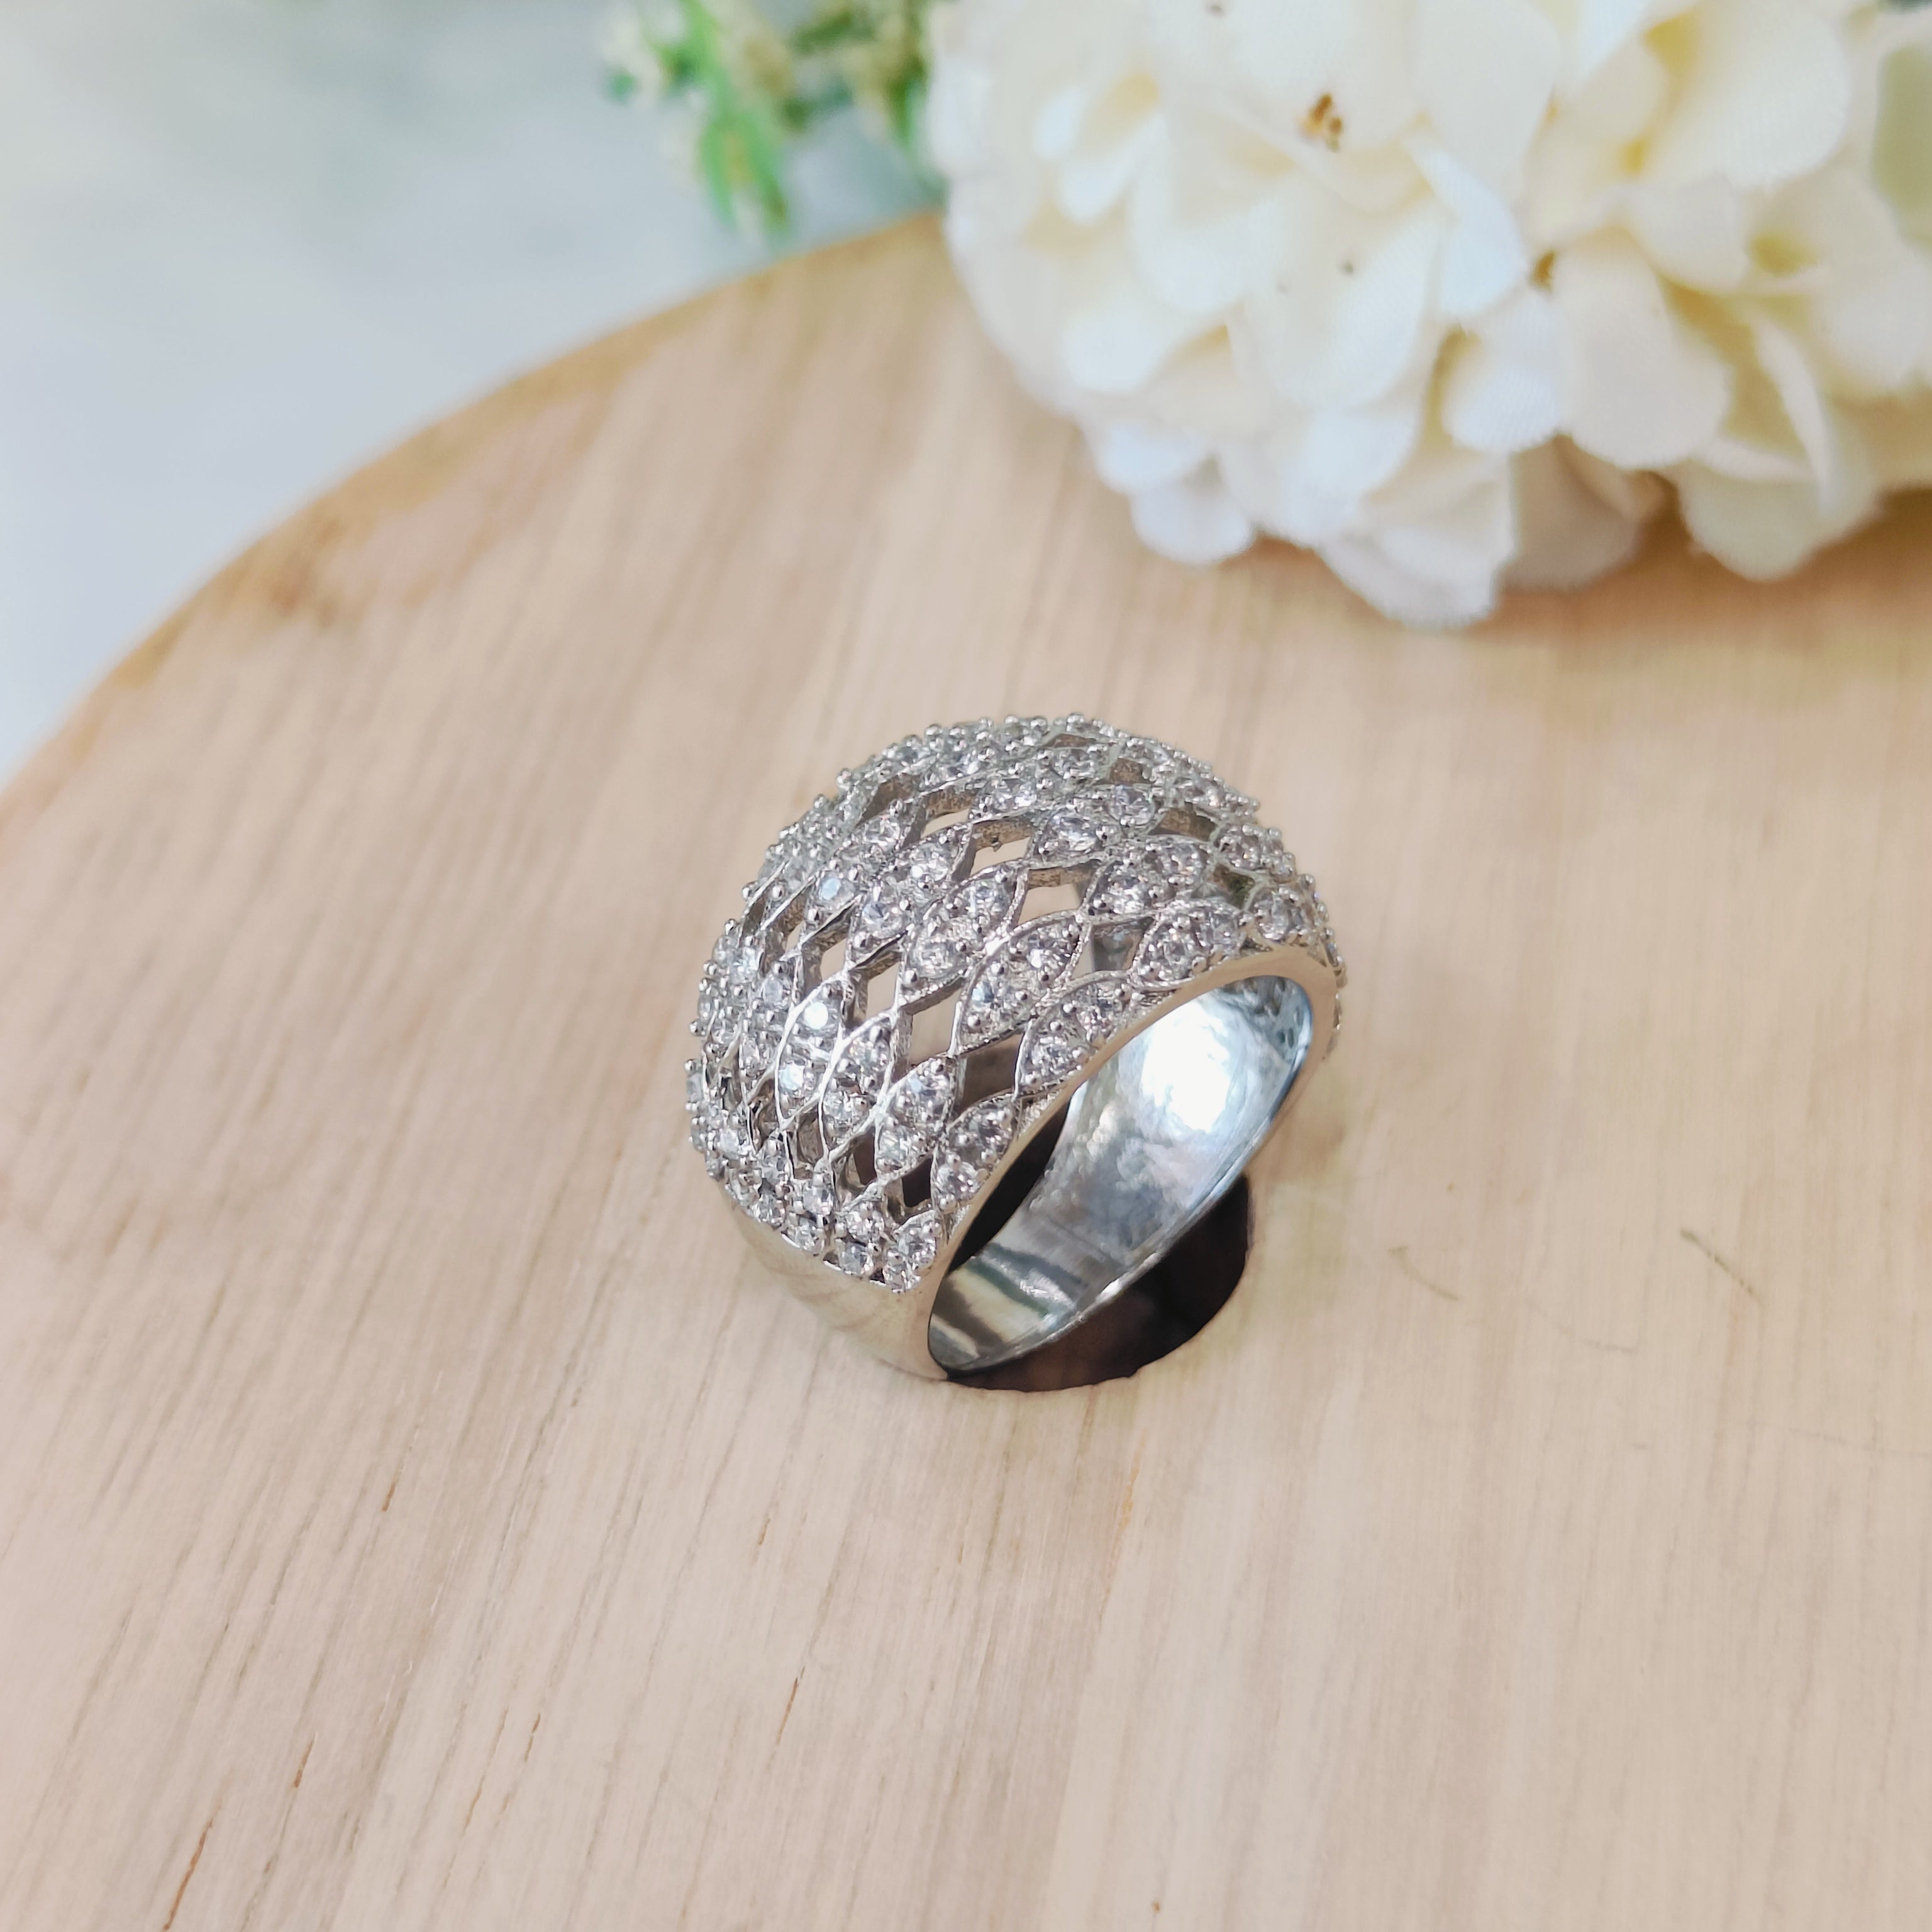 Vs sterling silver cocktail ring 173